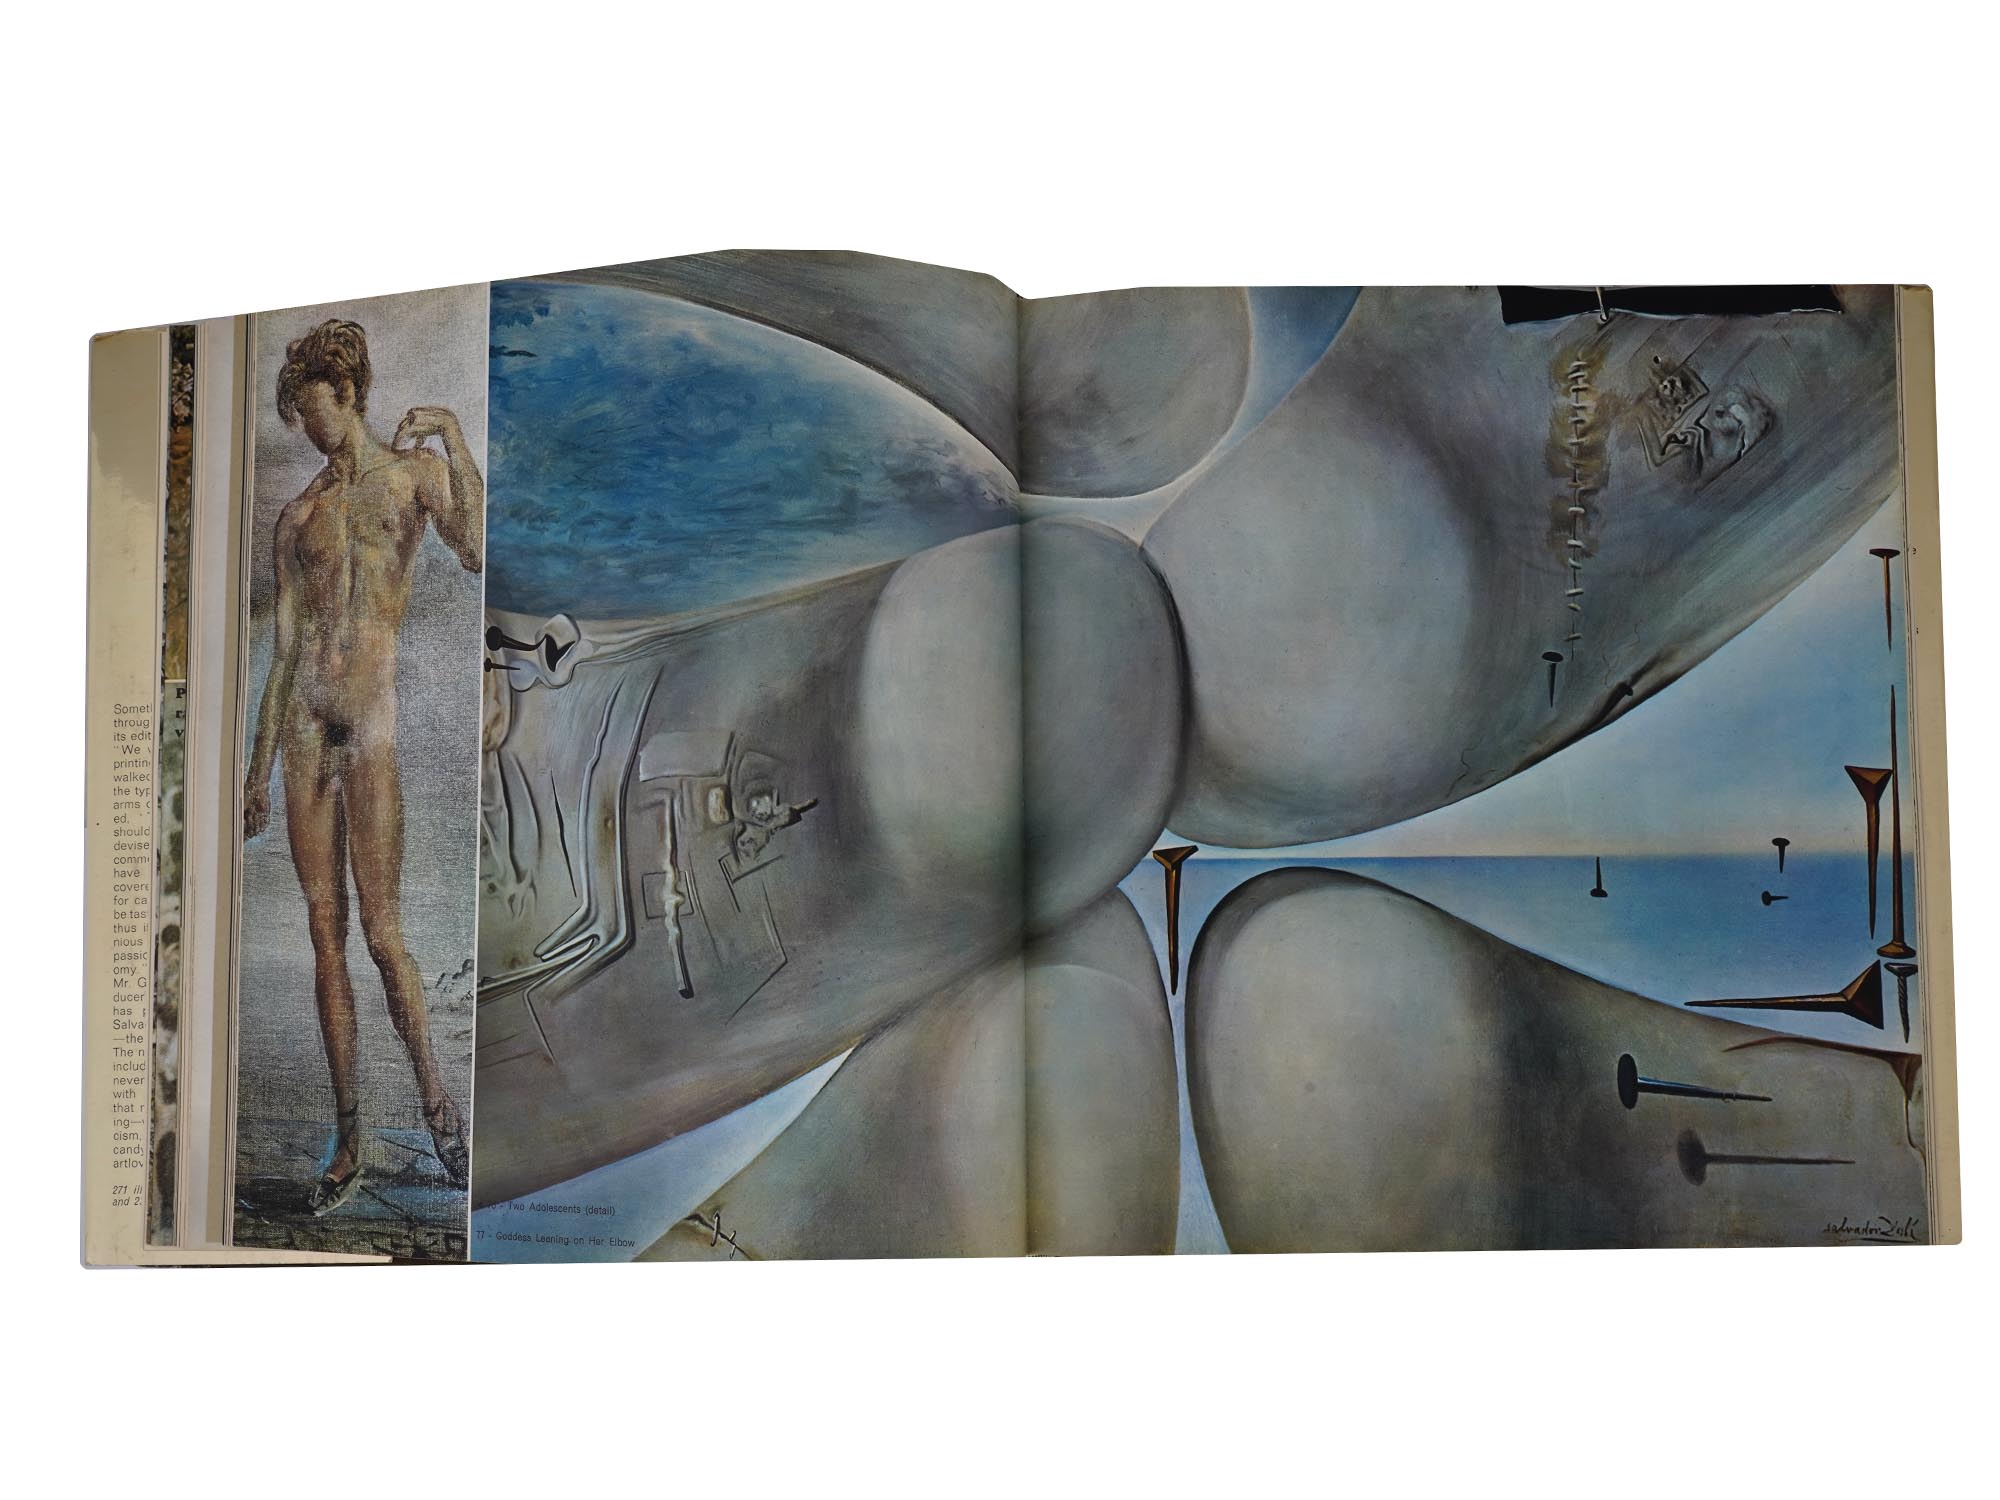 1968 SALVADOR DALI ART BOOK FIRST EDITION WITH JACKET PIC-9